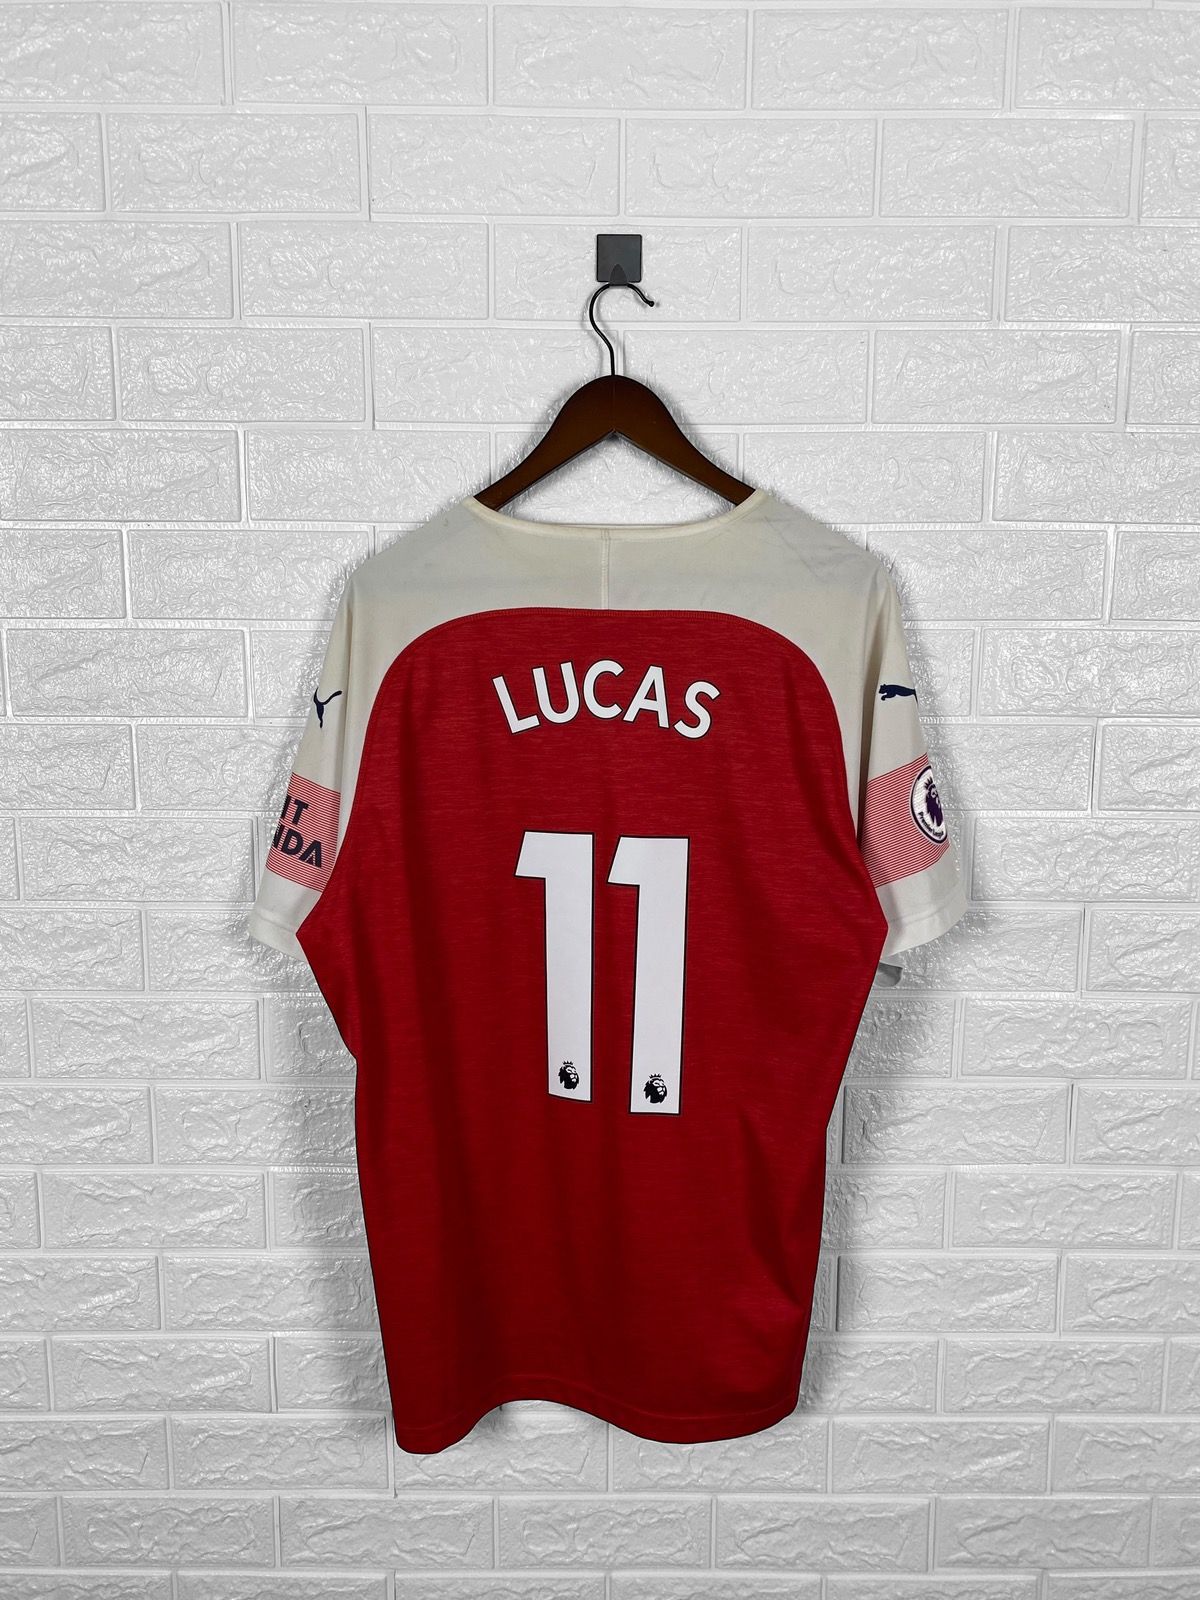 Pre-owned Jersey X Puma Arsenal 2017 2018 11 Lucas Football Soccer Jersey In Green/blue